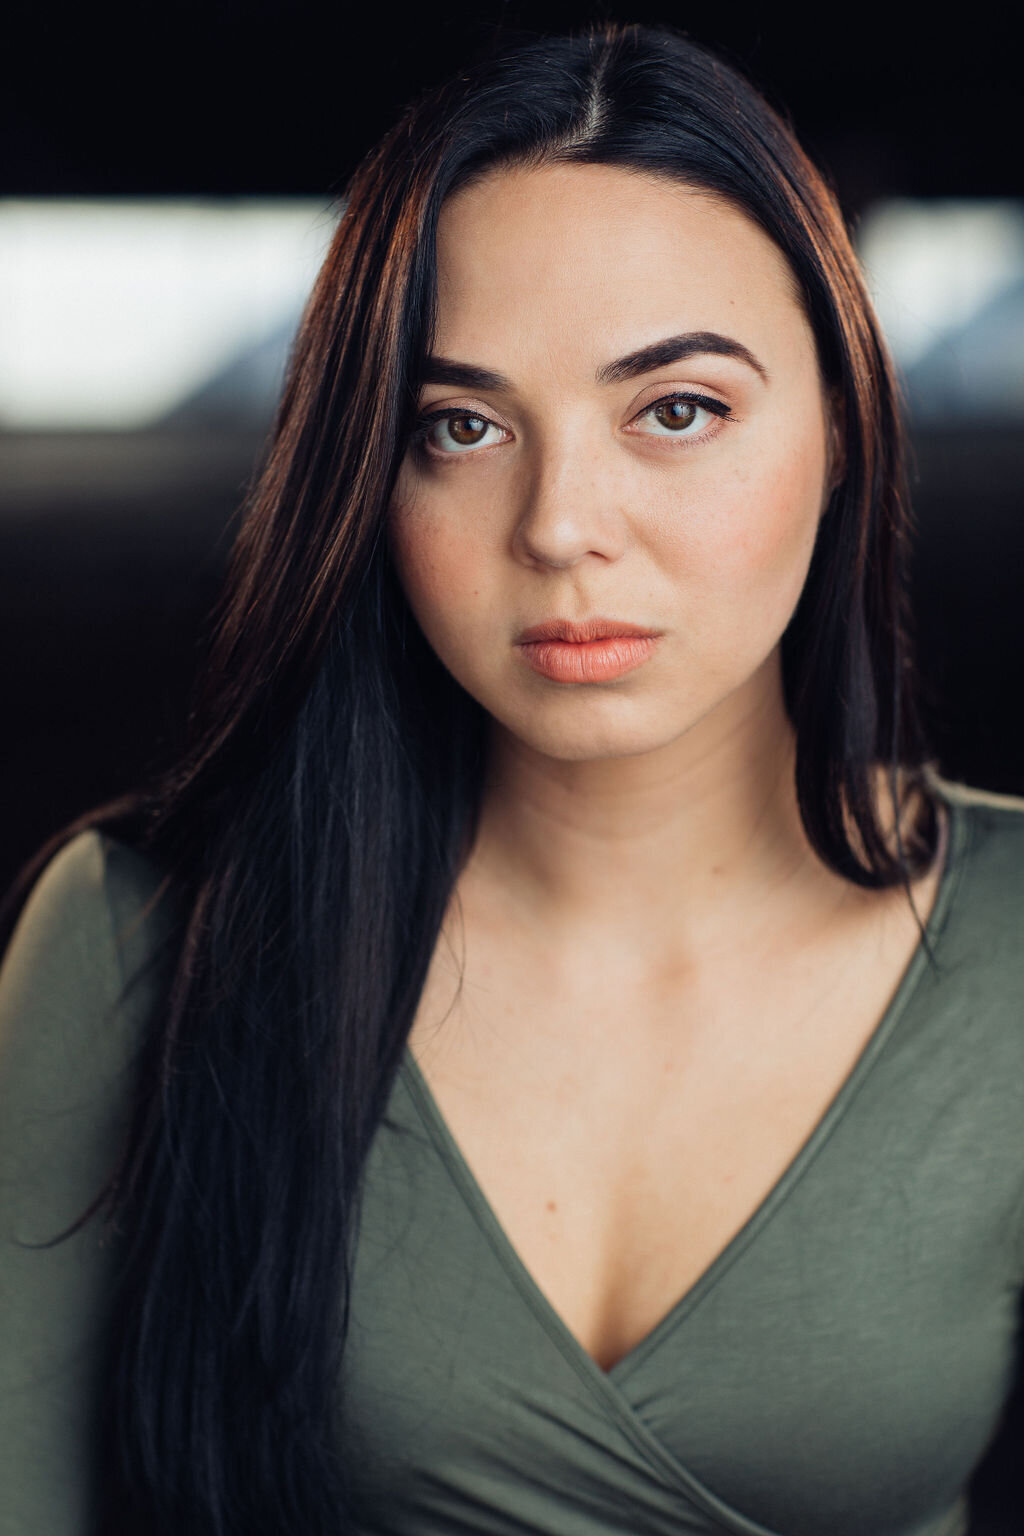 Headshot Photograph Of Young Woman In Gray V-Neckline Blouse Los Angeles